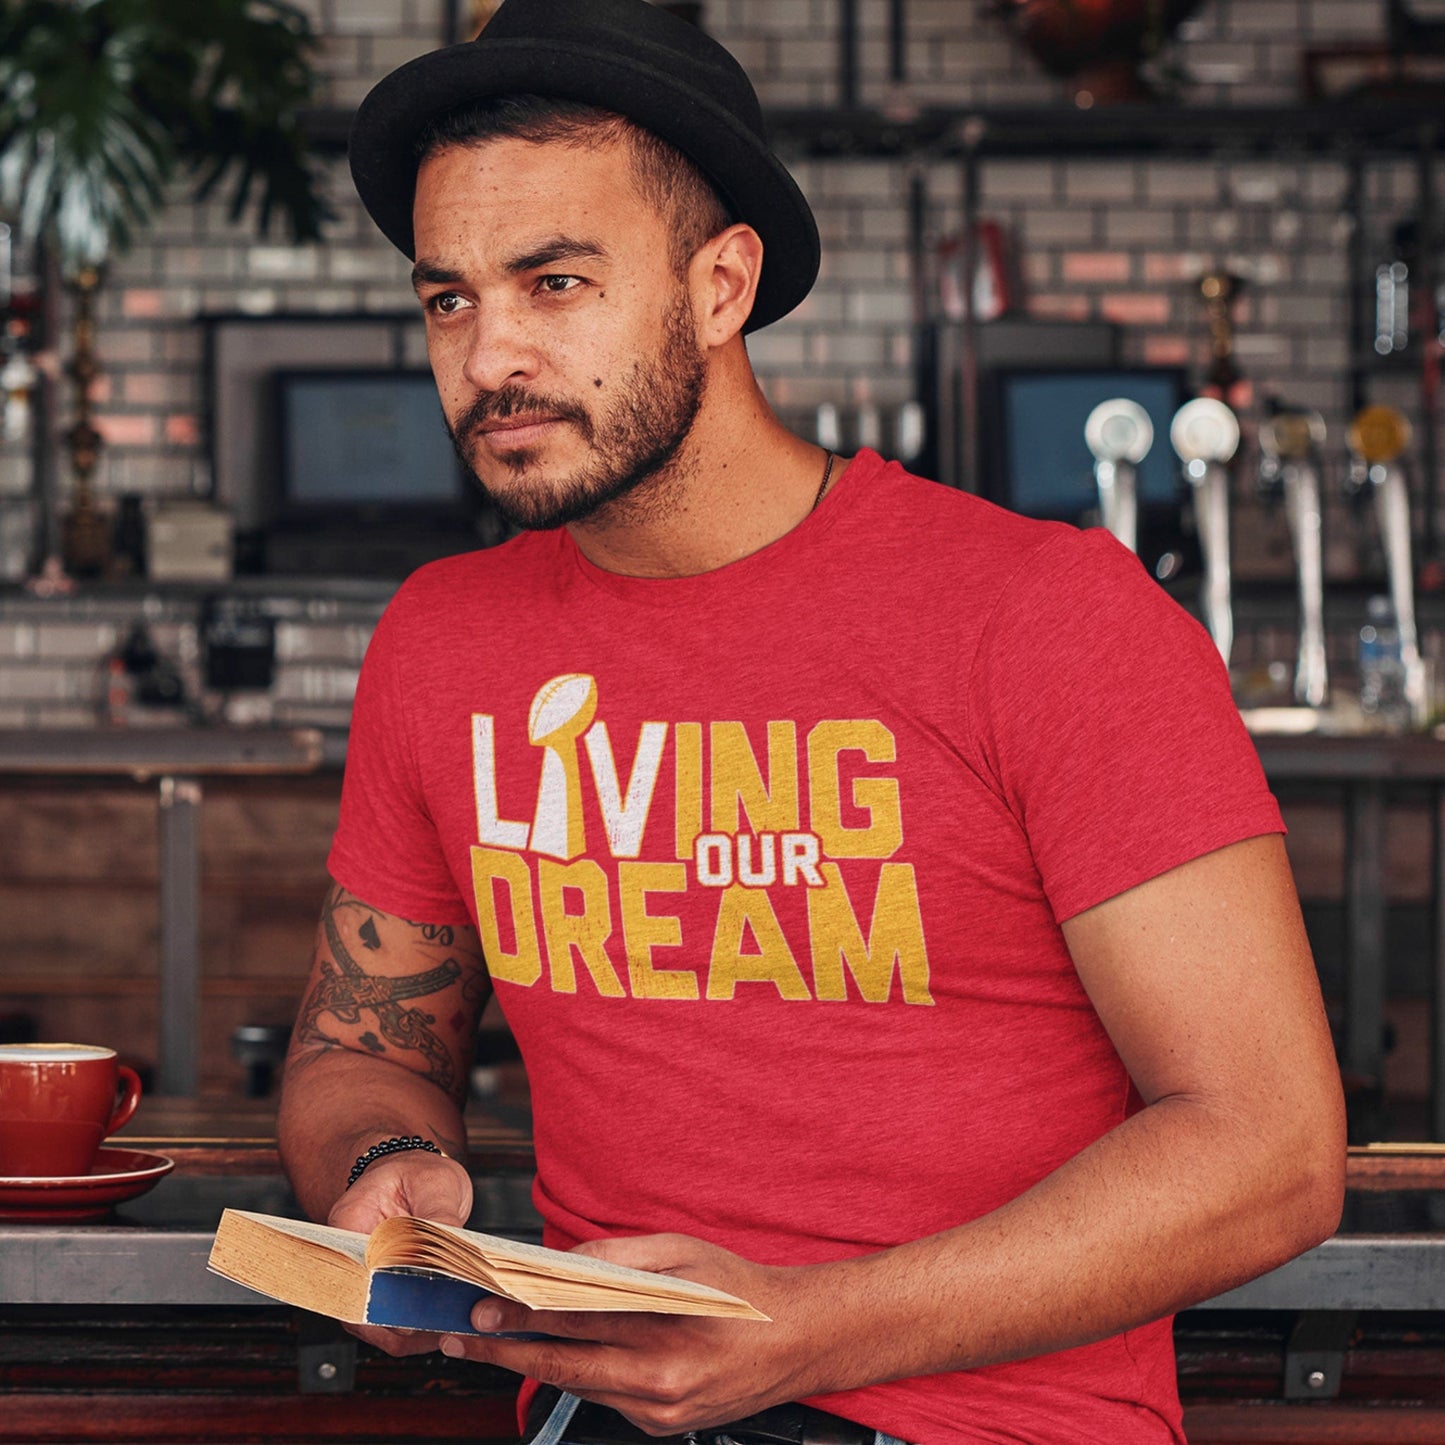 KC Swag Kansas City Chiefs red/yellow/white L(Lombardi trophy)IVING OUR DREAM on heather red t-shirt worn by male model sitting in cafe